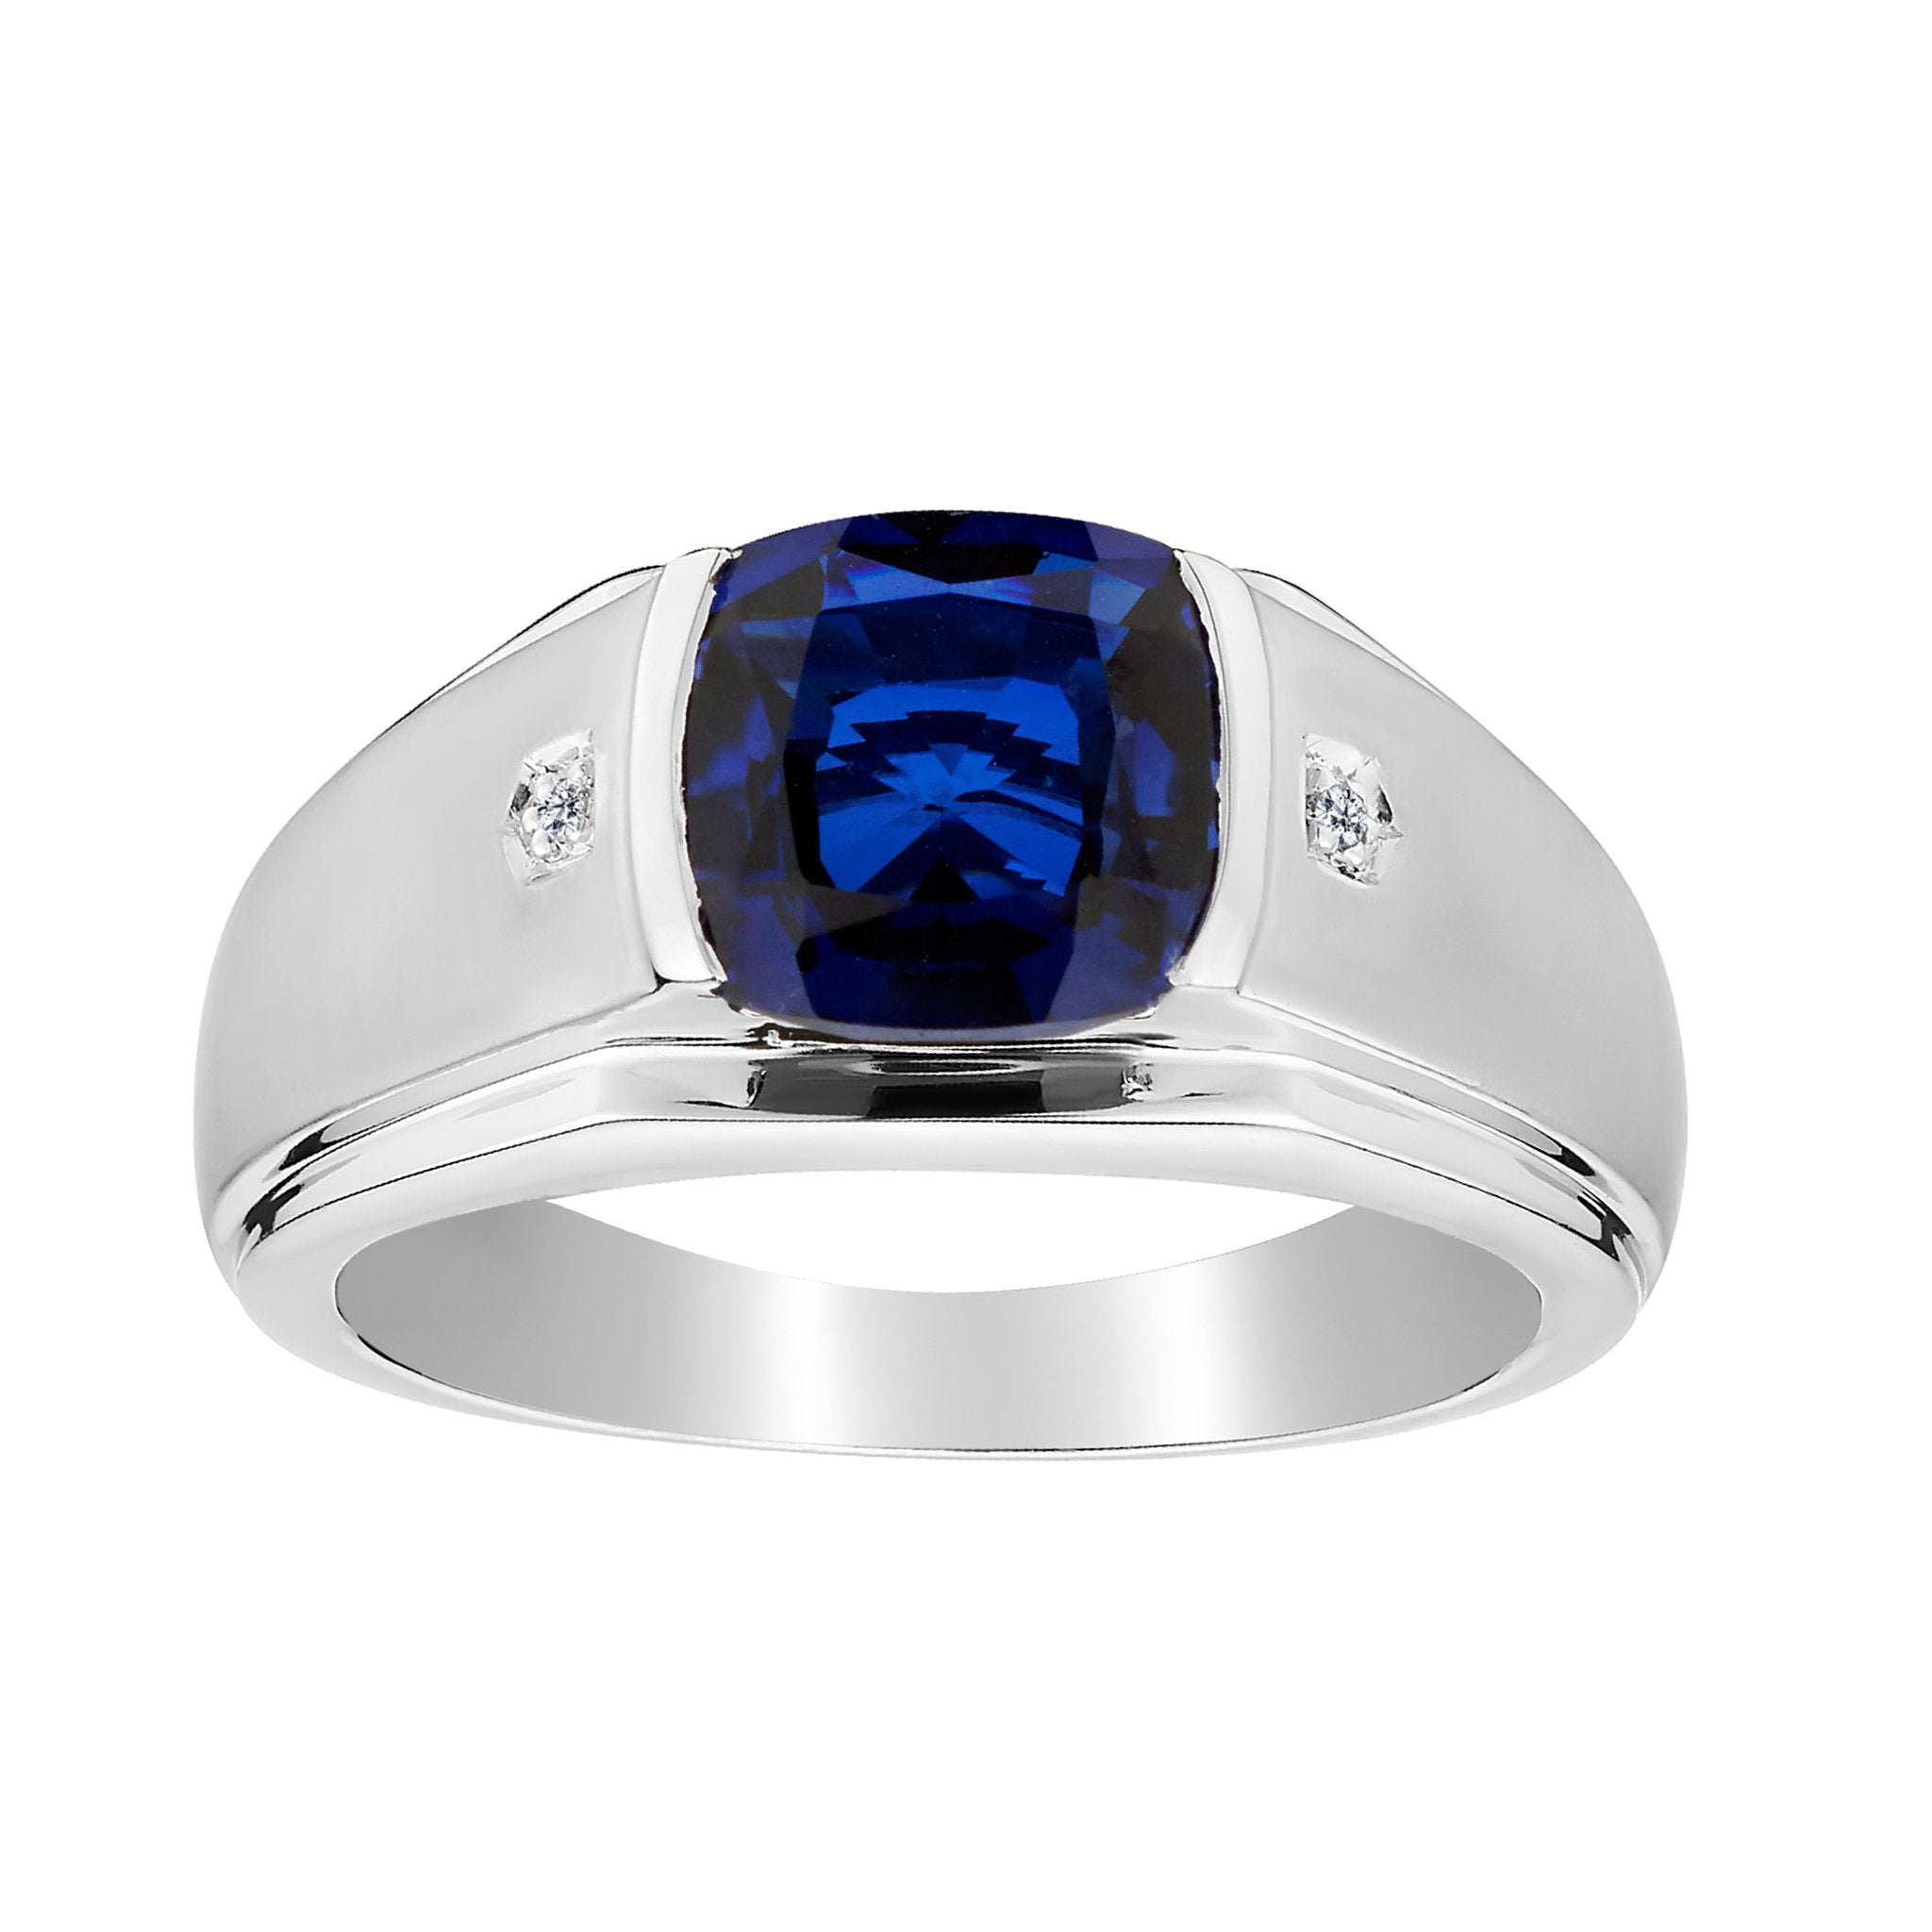 .015 CARAT DIAMOND AND CREATED SAPPHIRE GENTLEMAN'S RING, SILVER. Men’s Rings. - Griffin Jewellery Designs